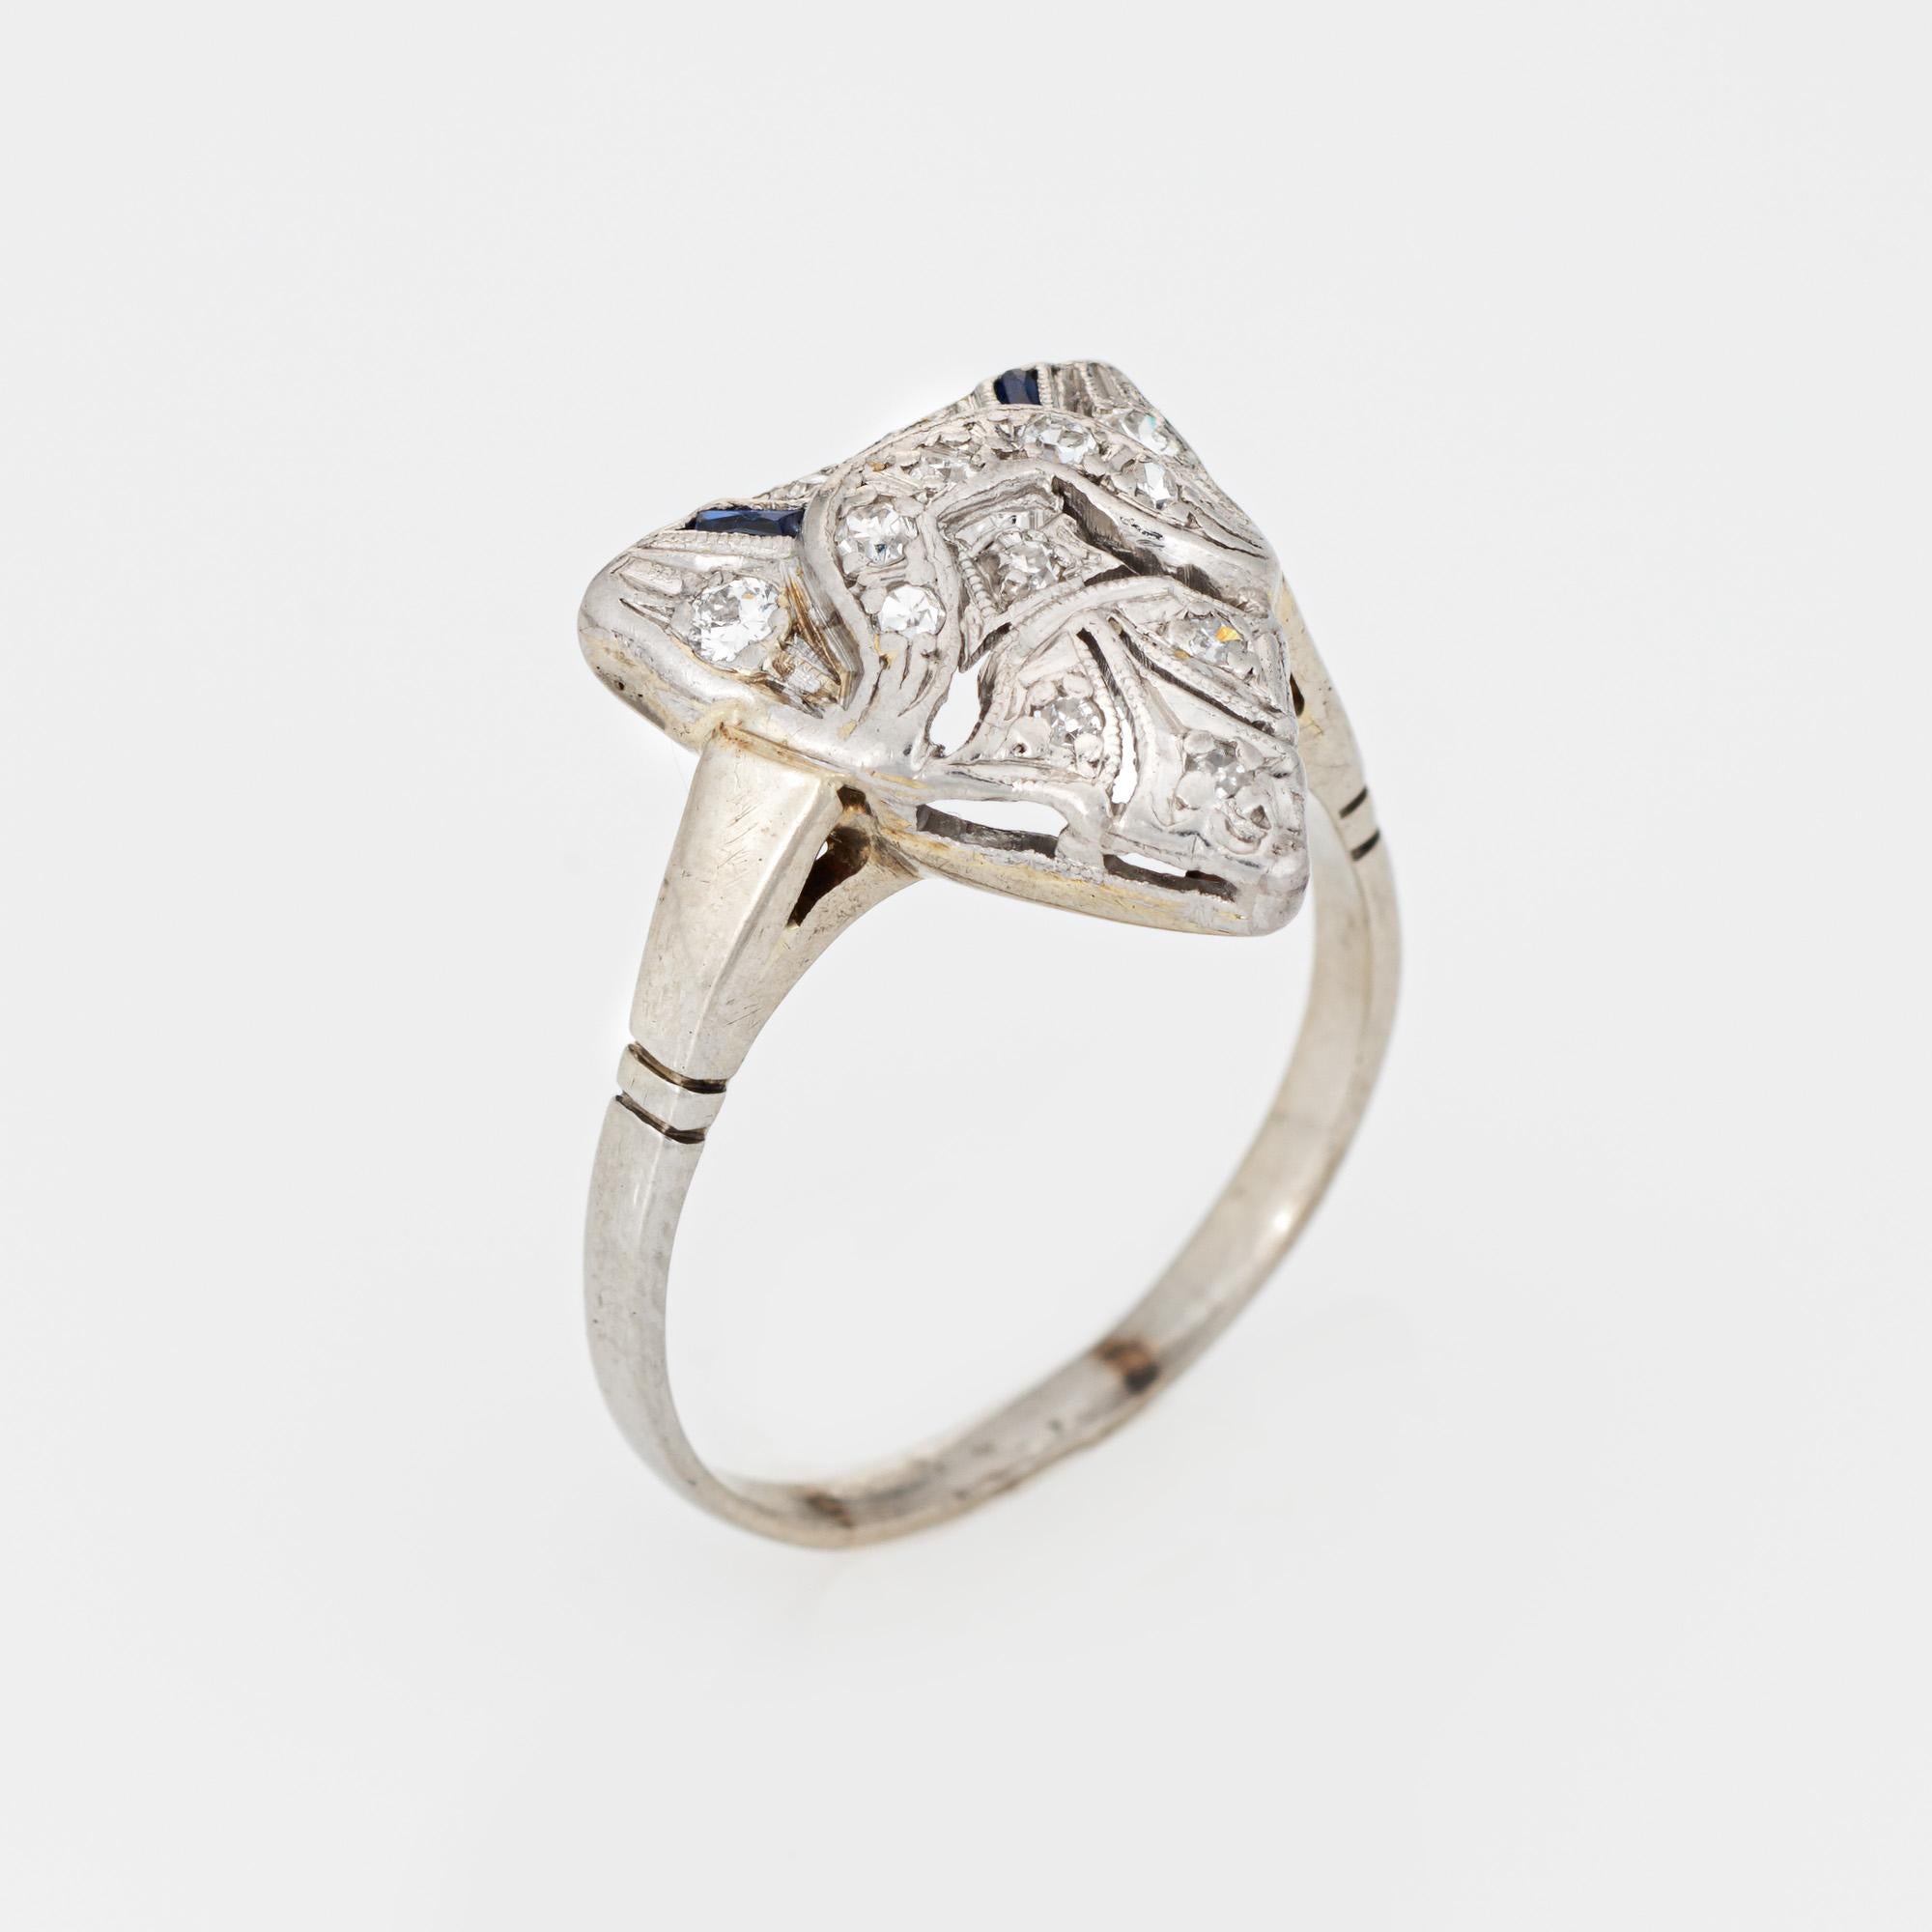 Finely detailed vintage Art Deco diamond & synthetic sapphire ring (circa 1920s to 1930s) crafted in 14k white gold.  

13 single cut diamonds total an estimated 0.06 carats (estimated at I-J color and SI2-I2 clarity). Two French cut synthetic